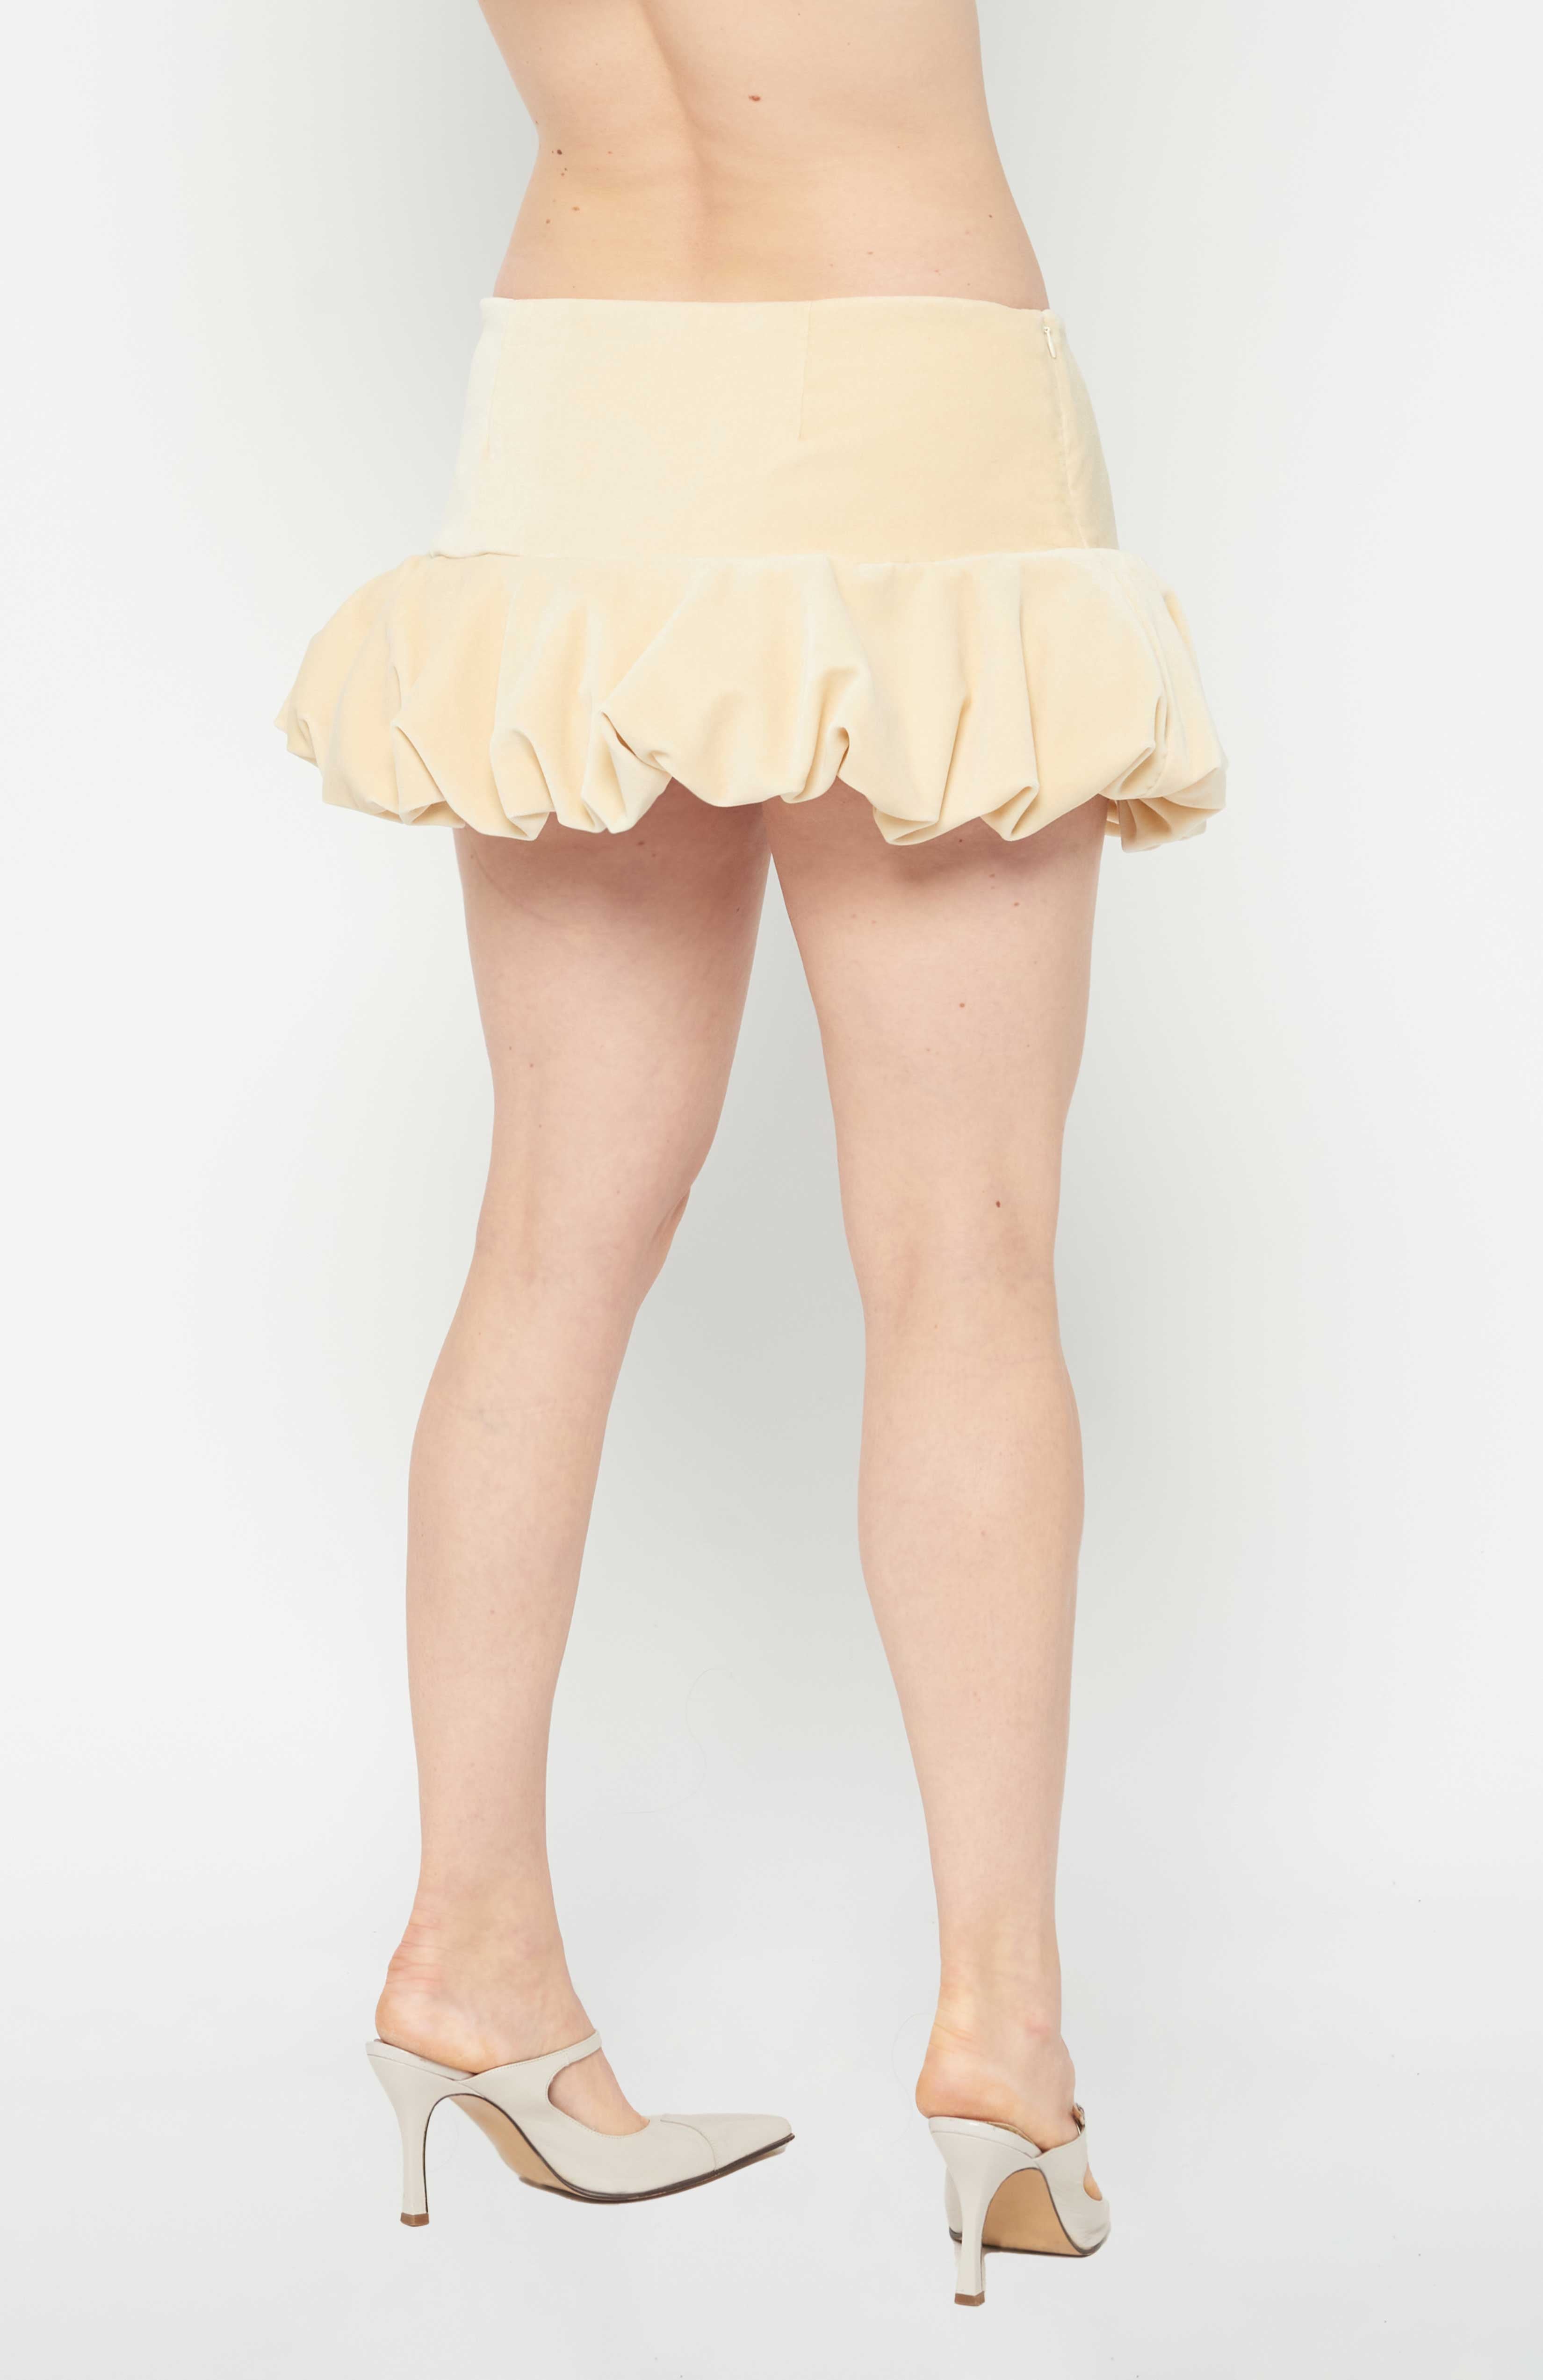 A flirty playful bubble mid waisted mini skirt that salutes the fashion trends of the 1980s. This mid rise puffball style is created with a crinoline inner foundation to hold its balloon-like shape. A wonderful way to add volume to a silhouette.